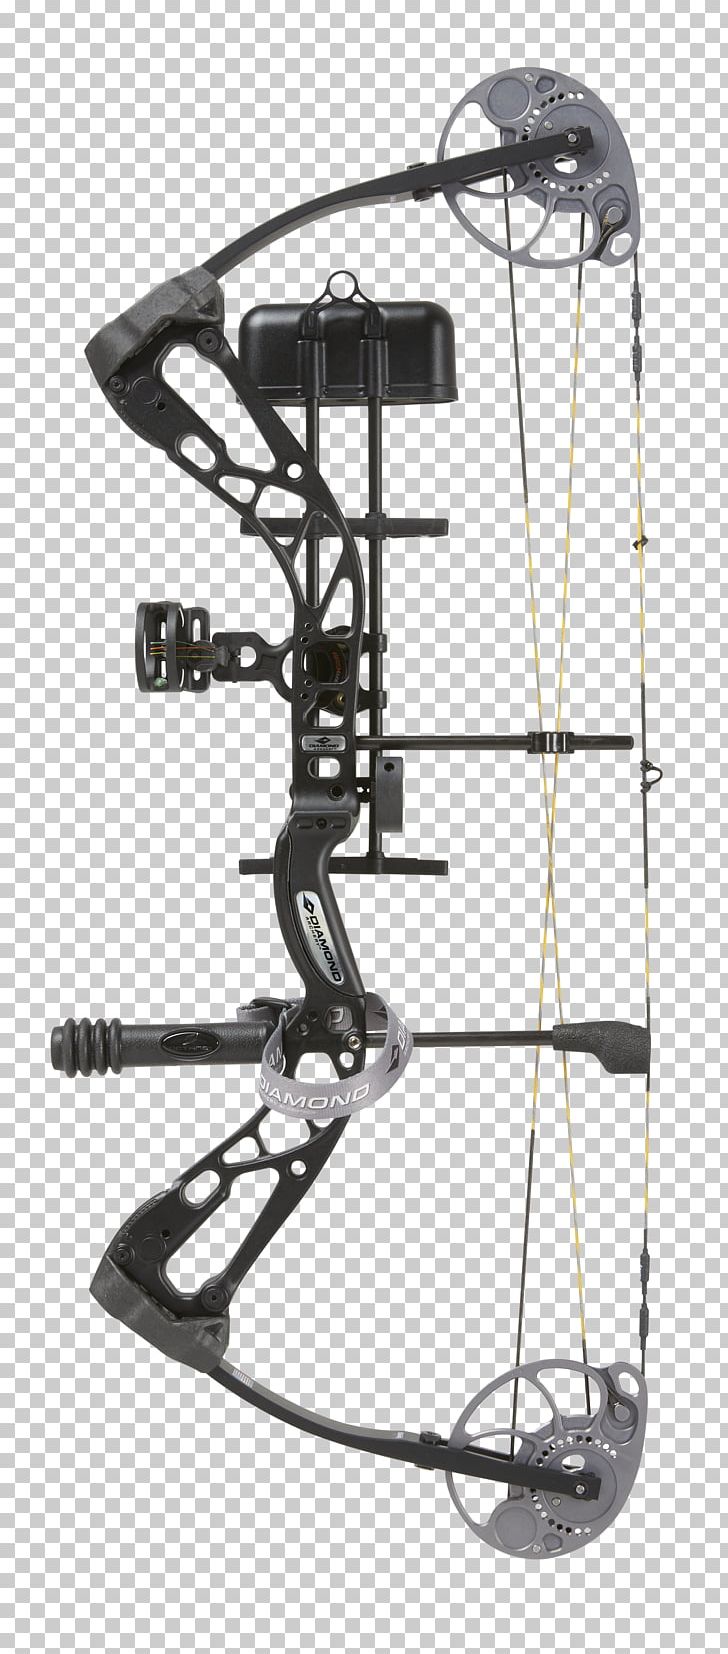 Compound Bows Archery Bow And Arrow Binary Cam Diamond PNG, Clipart, Archery, Binary Cam, Bow And Arrow, Bowfishing, Bullseye Free PNG Download